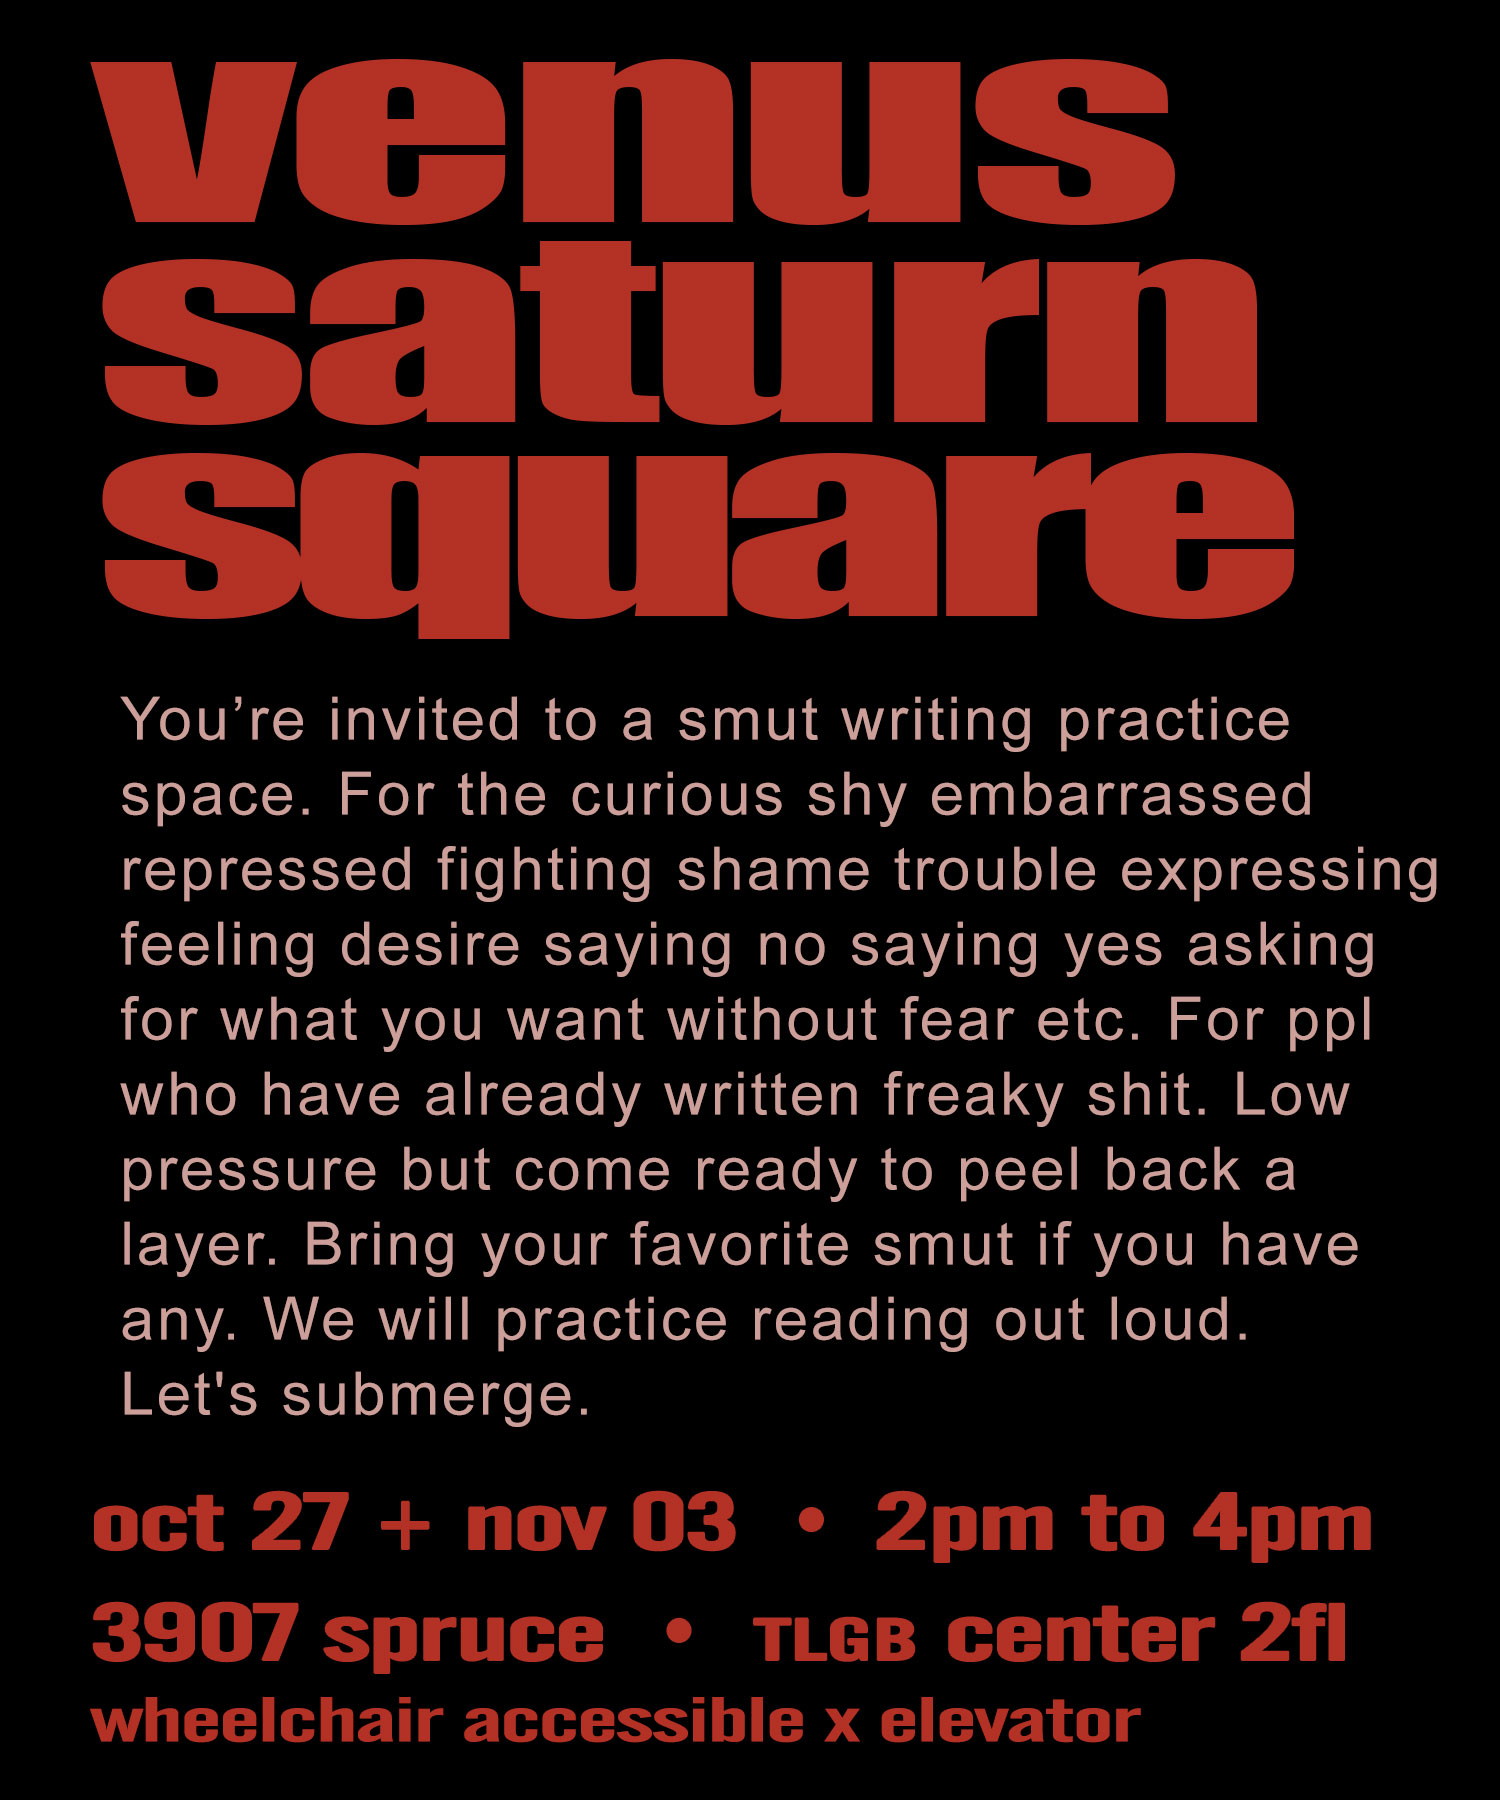 VENUS SATURN SQUARE call for submissions